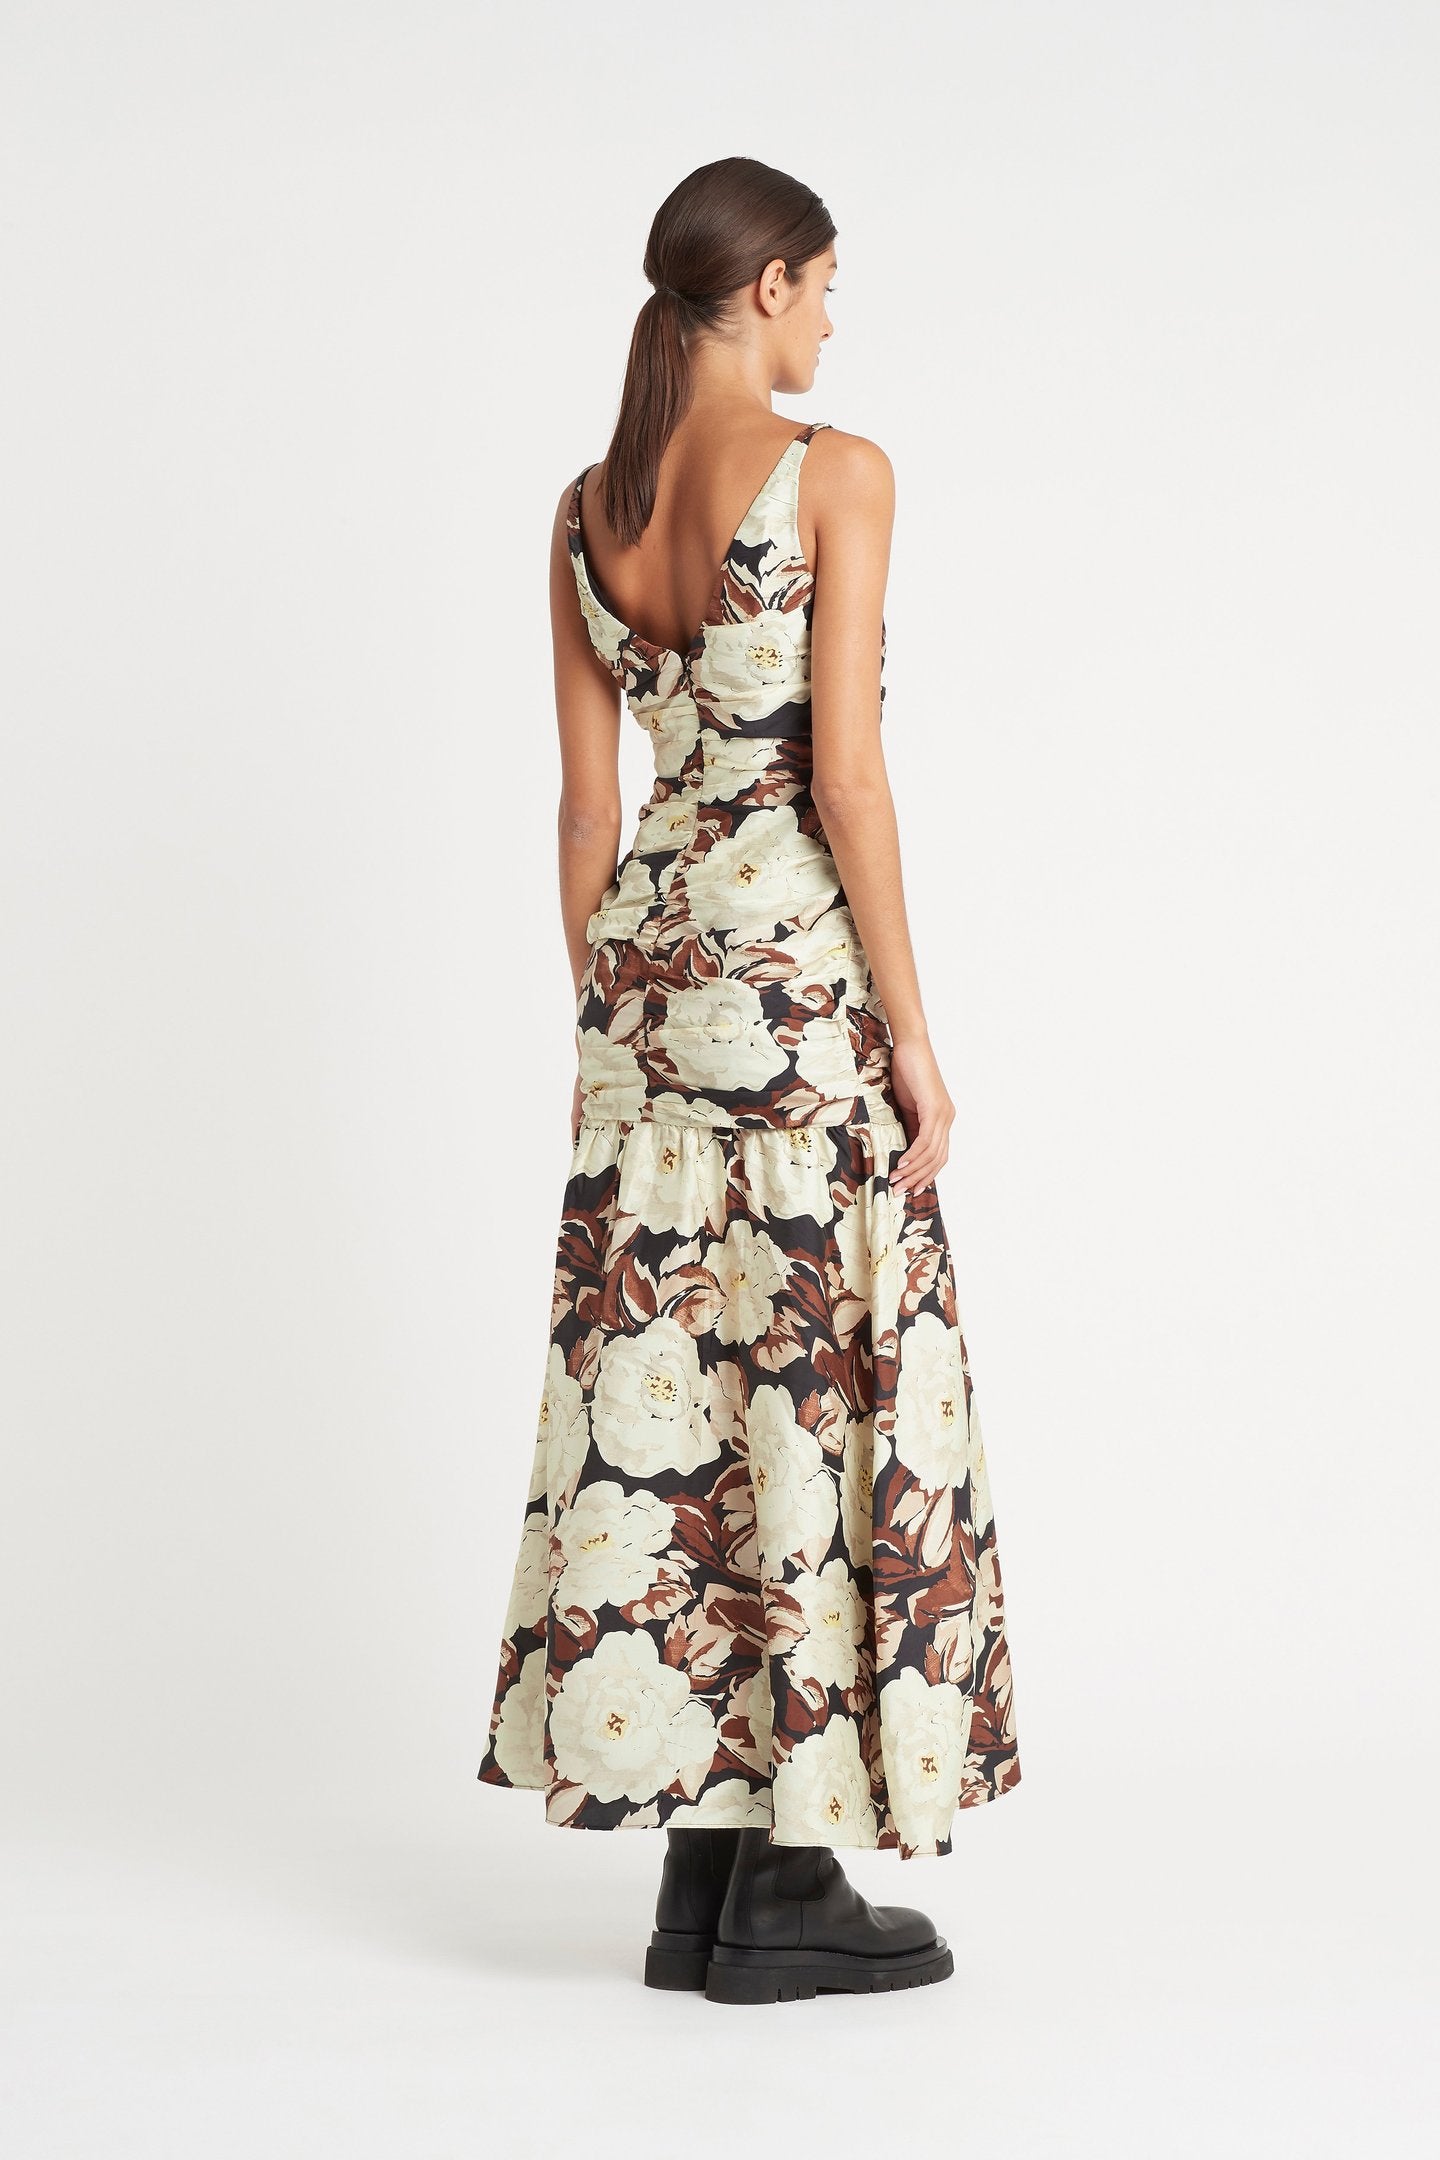 SIR - VIVIENNE GOWN - FLORAL (BYRON BAY) Back view